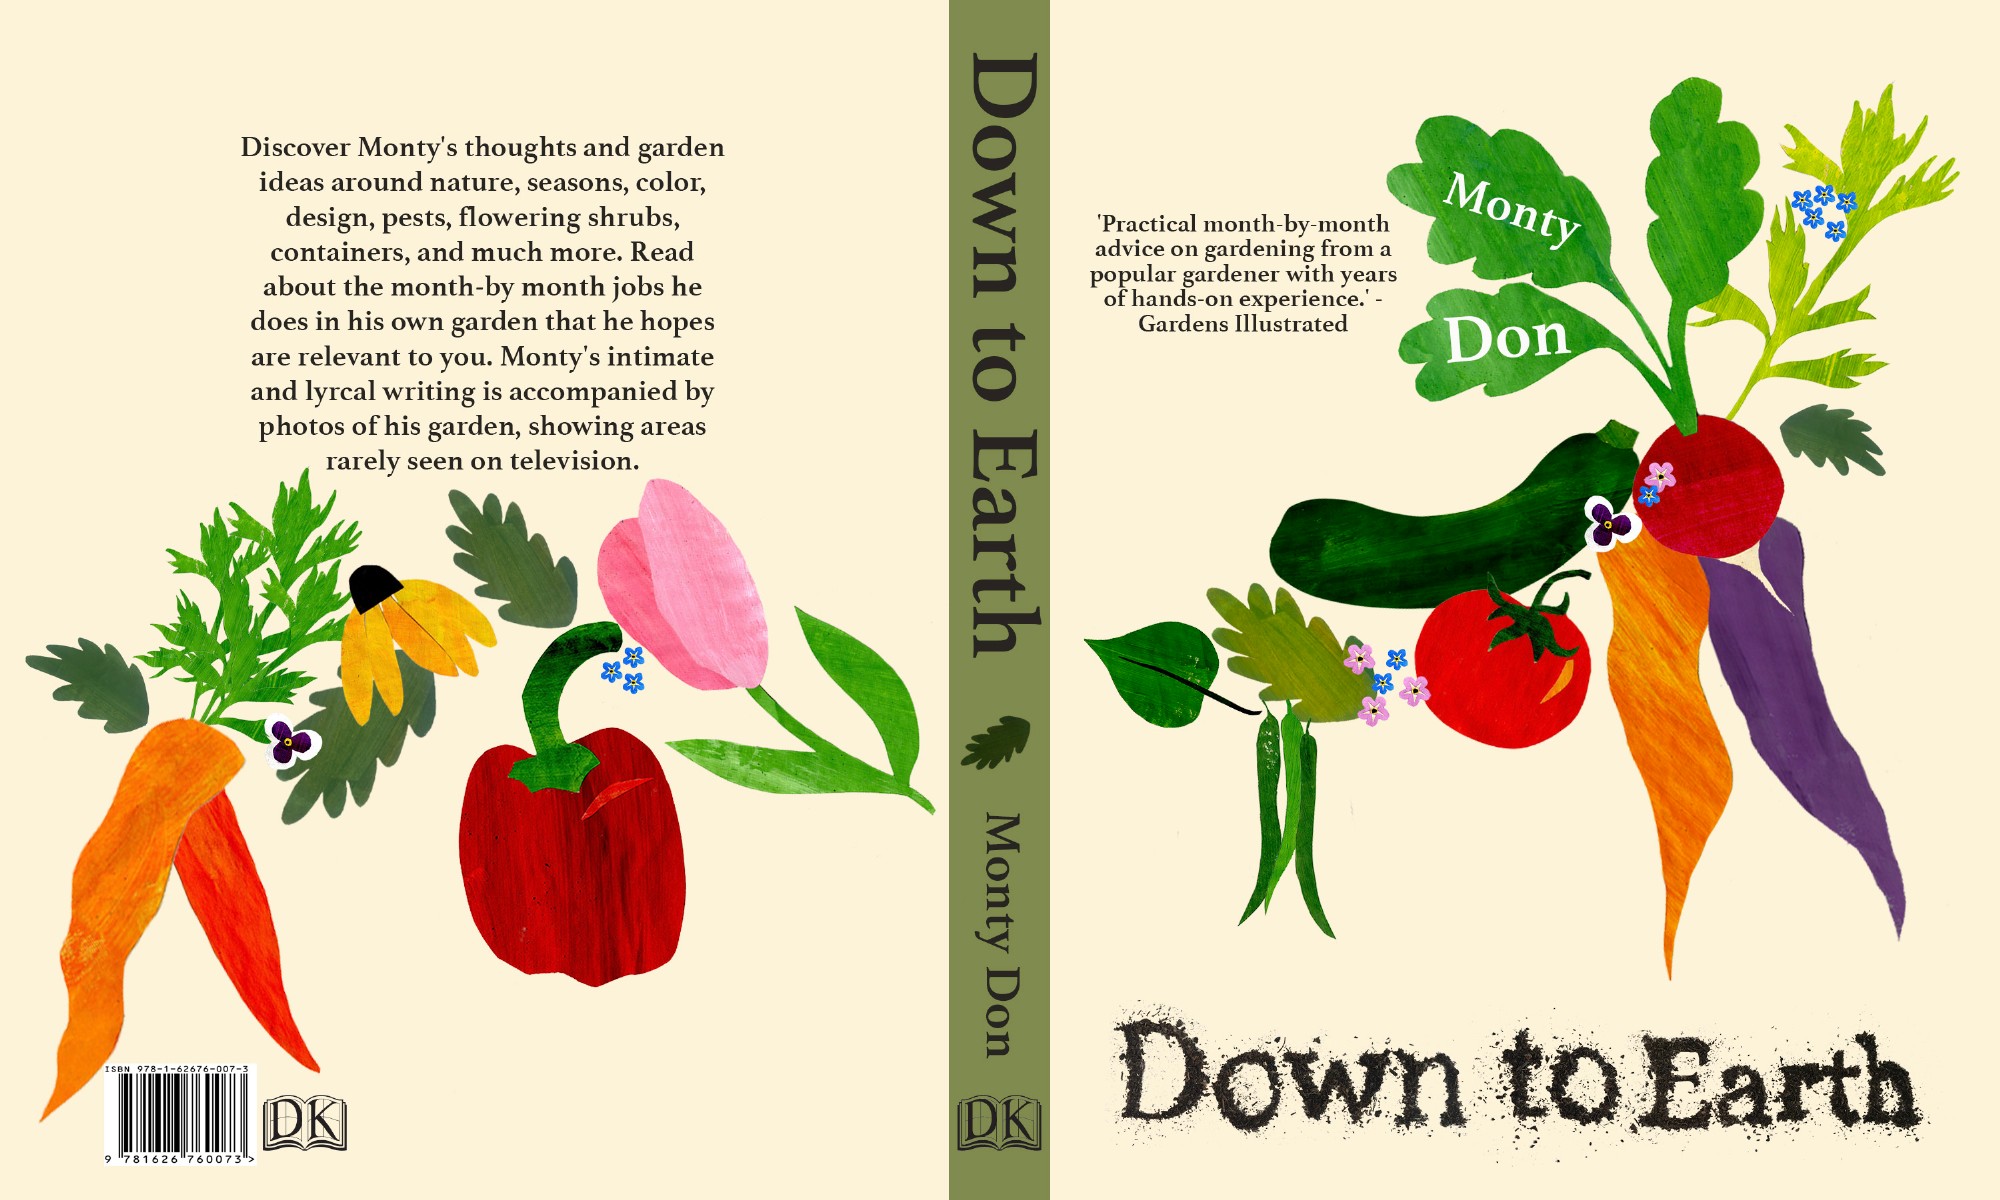 Book cover illustration for a book about gardening.